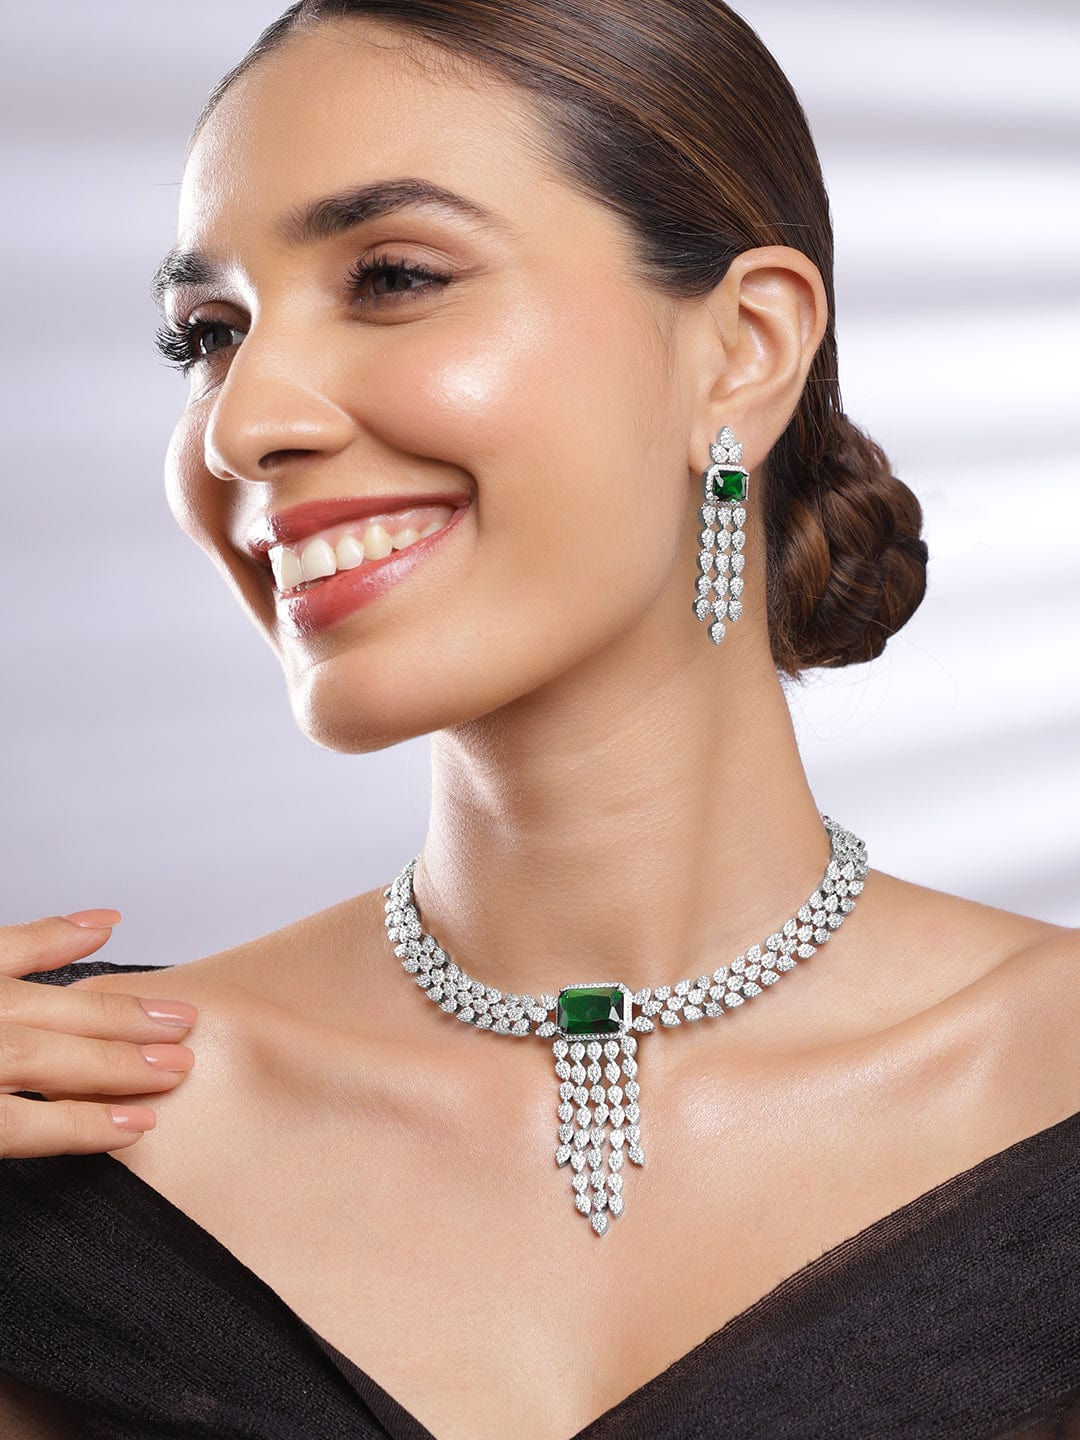 Rhodium Plated Luxury AAA Cubic Zirconia And Emerald Studed  Necklace Set Necklaces, Necklace Sets, Chains & Mangalsutra